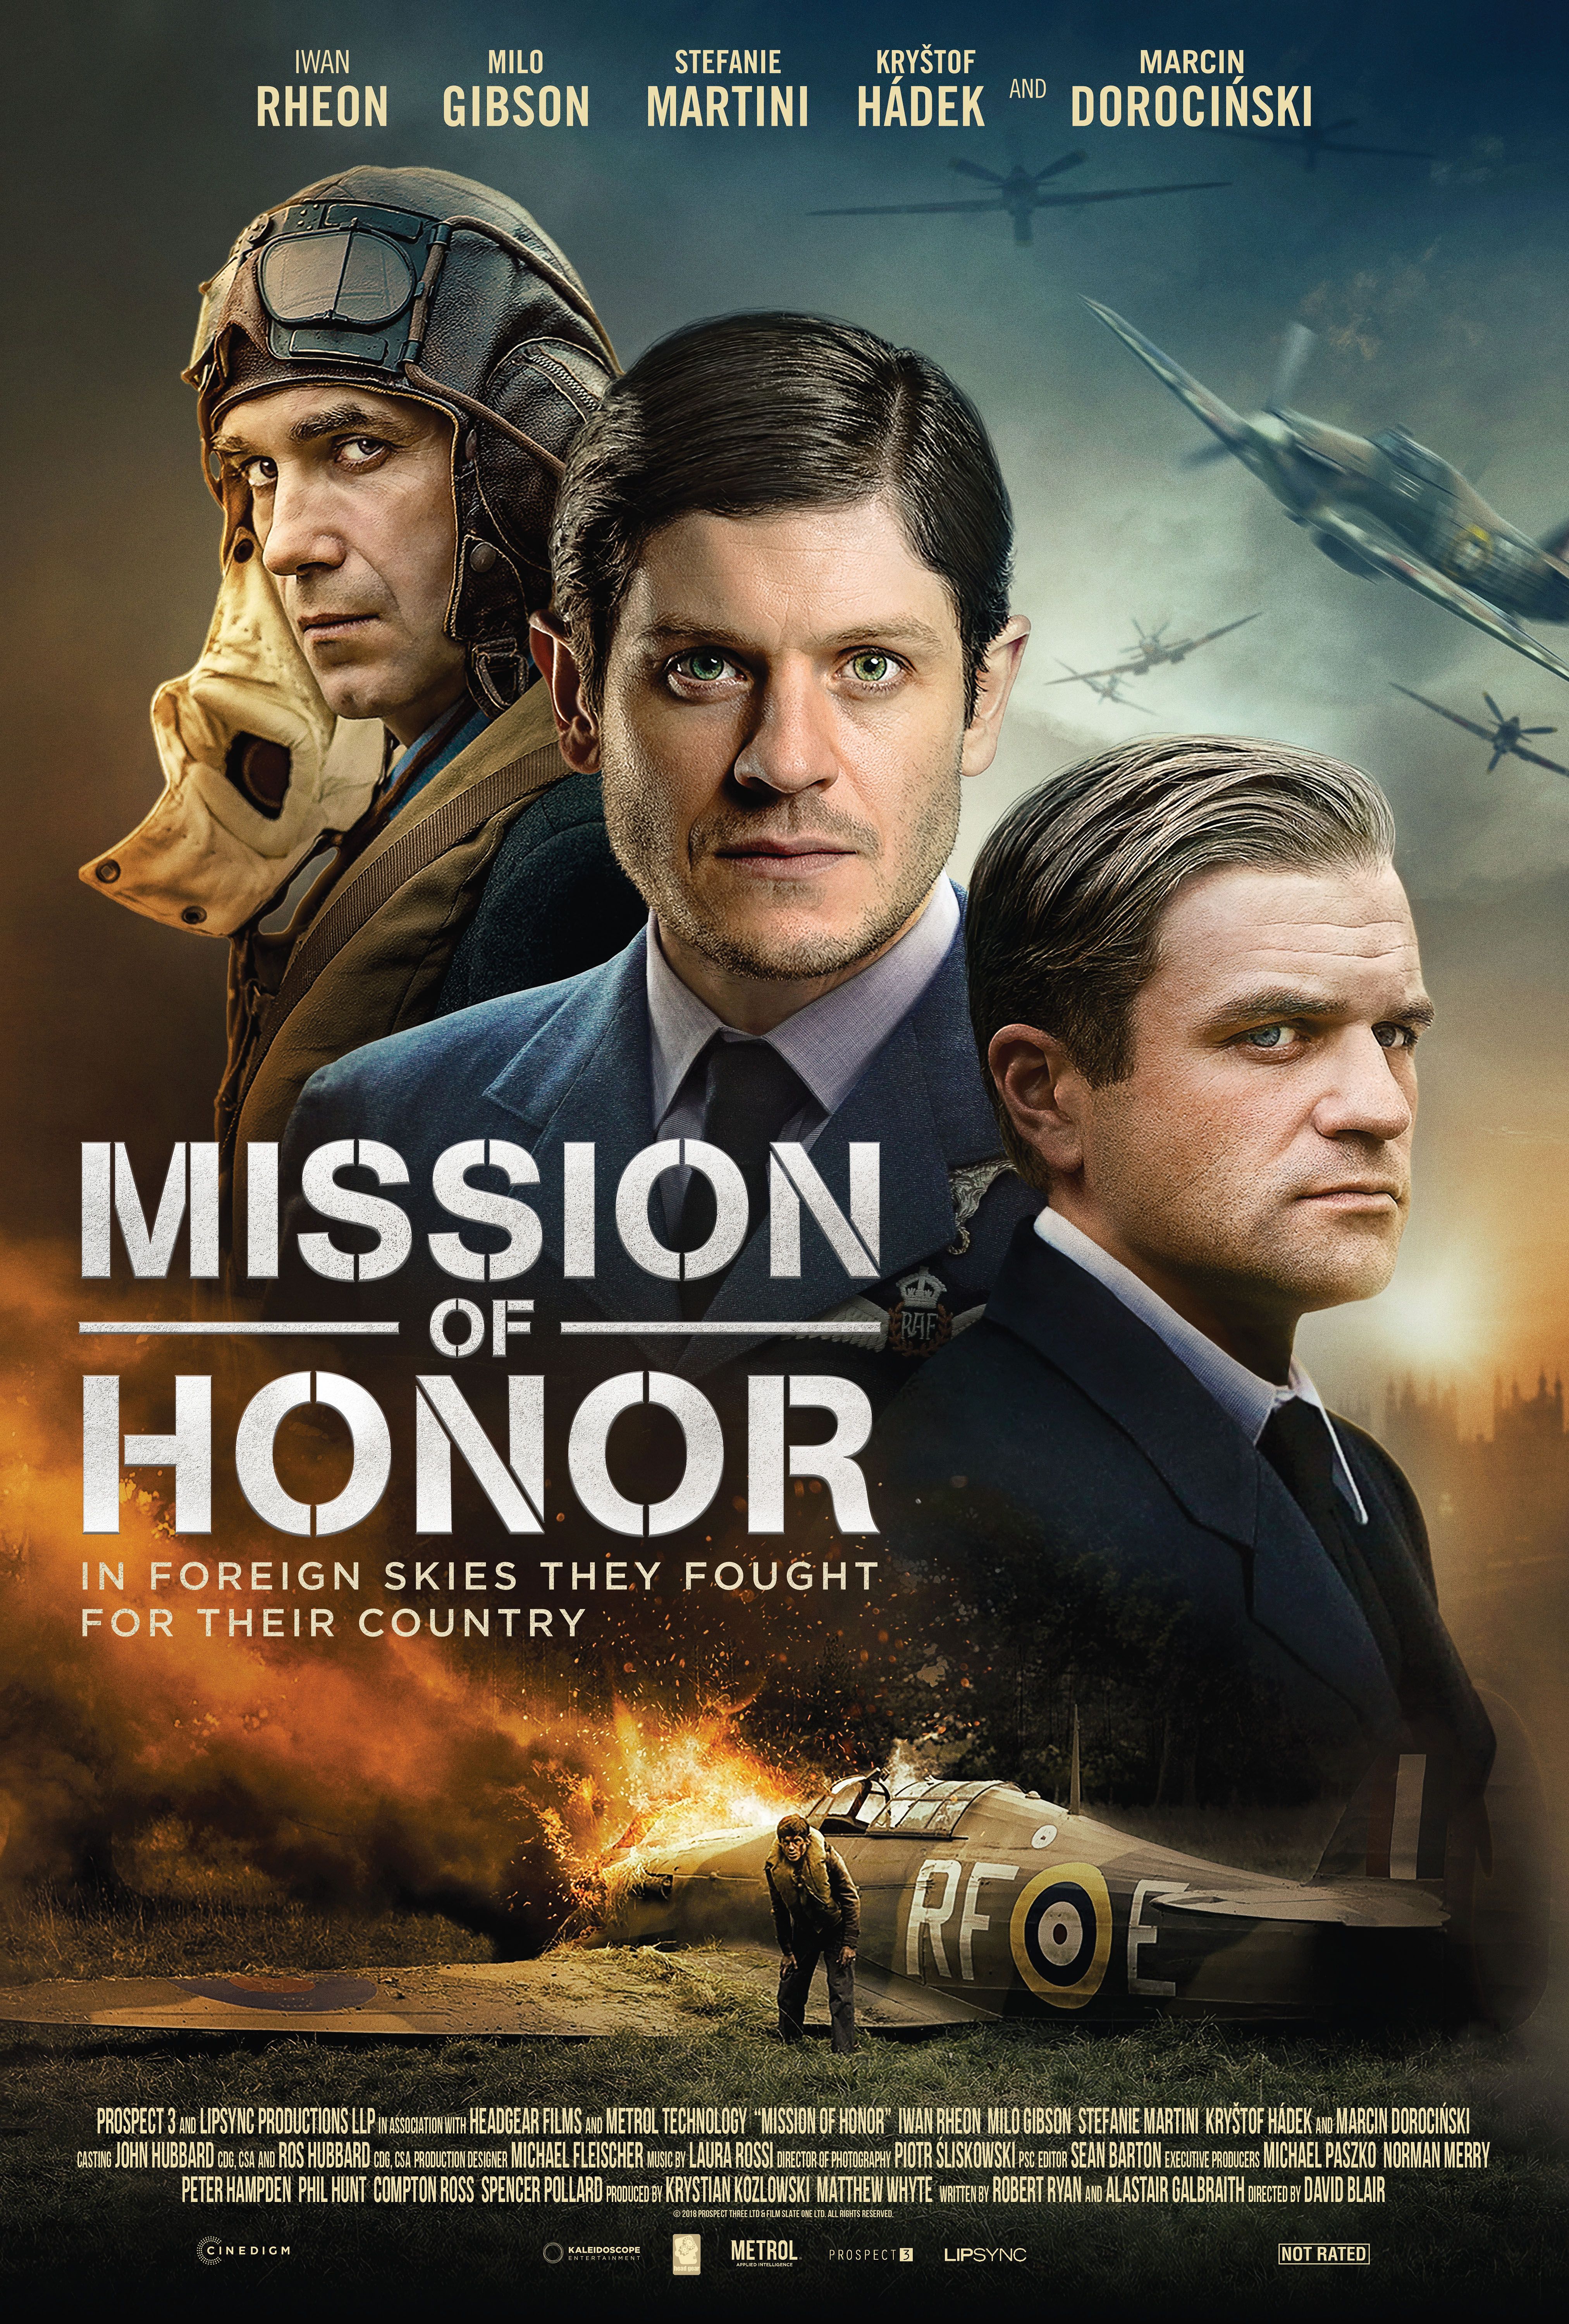 Mission of Honor (2021) Hindi Dubbed Full Movie